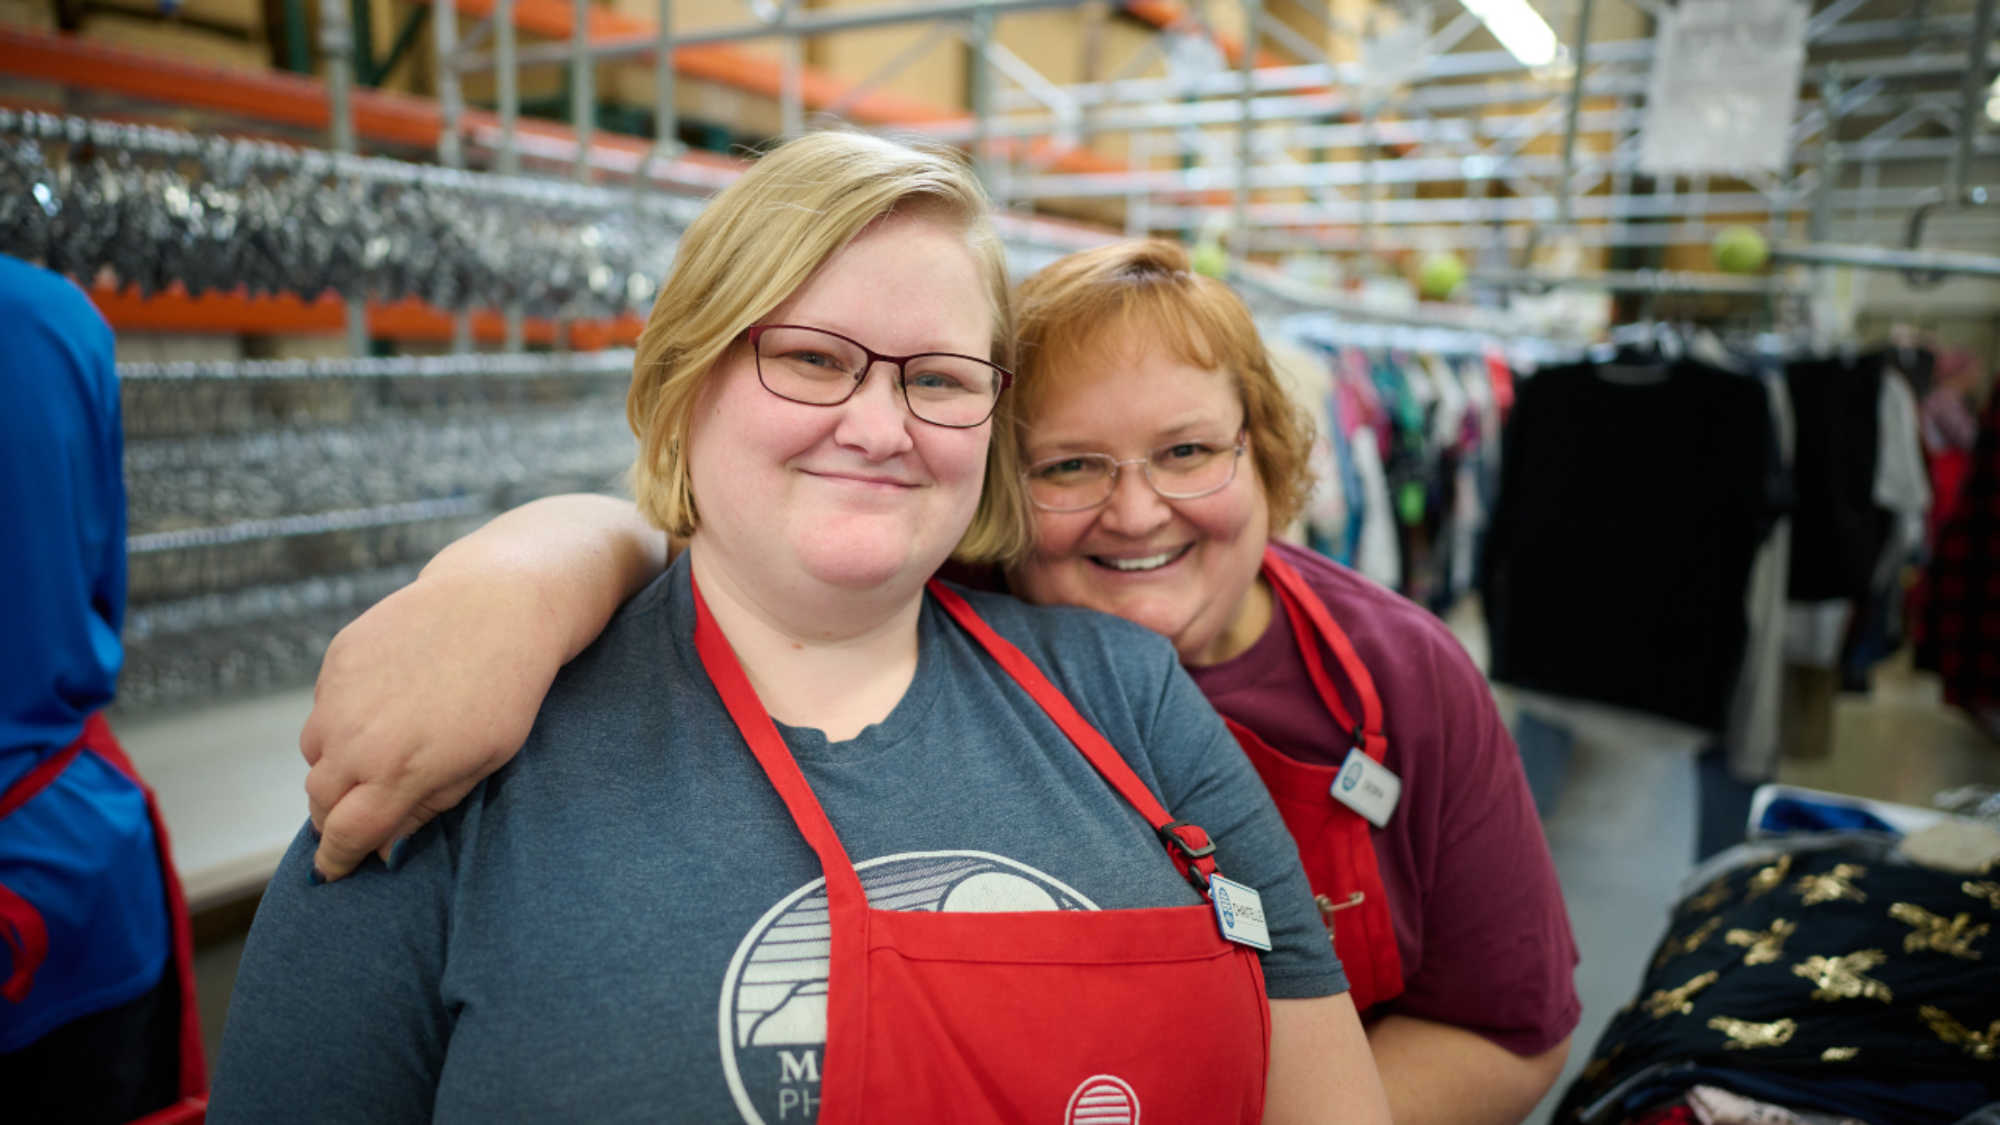 Two female DI associates smile at the camera as they embrace. They are working in the back room, sorting clothing donations.